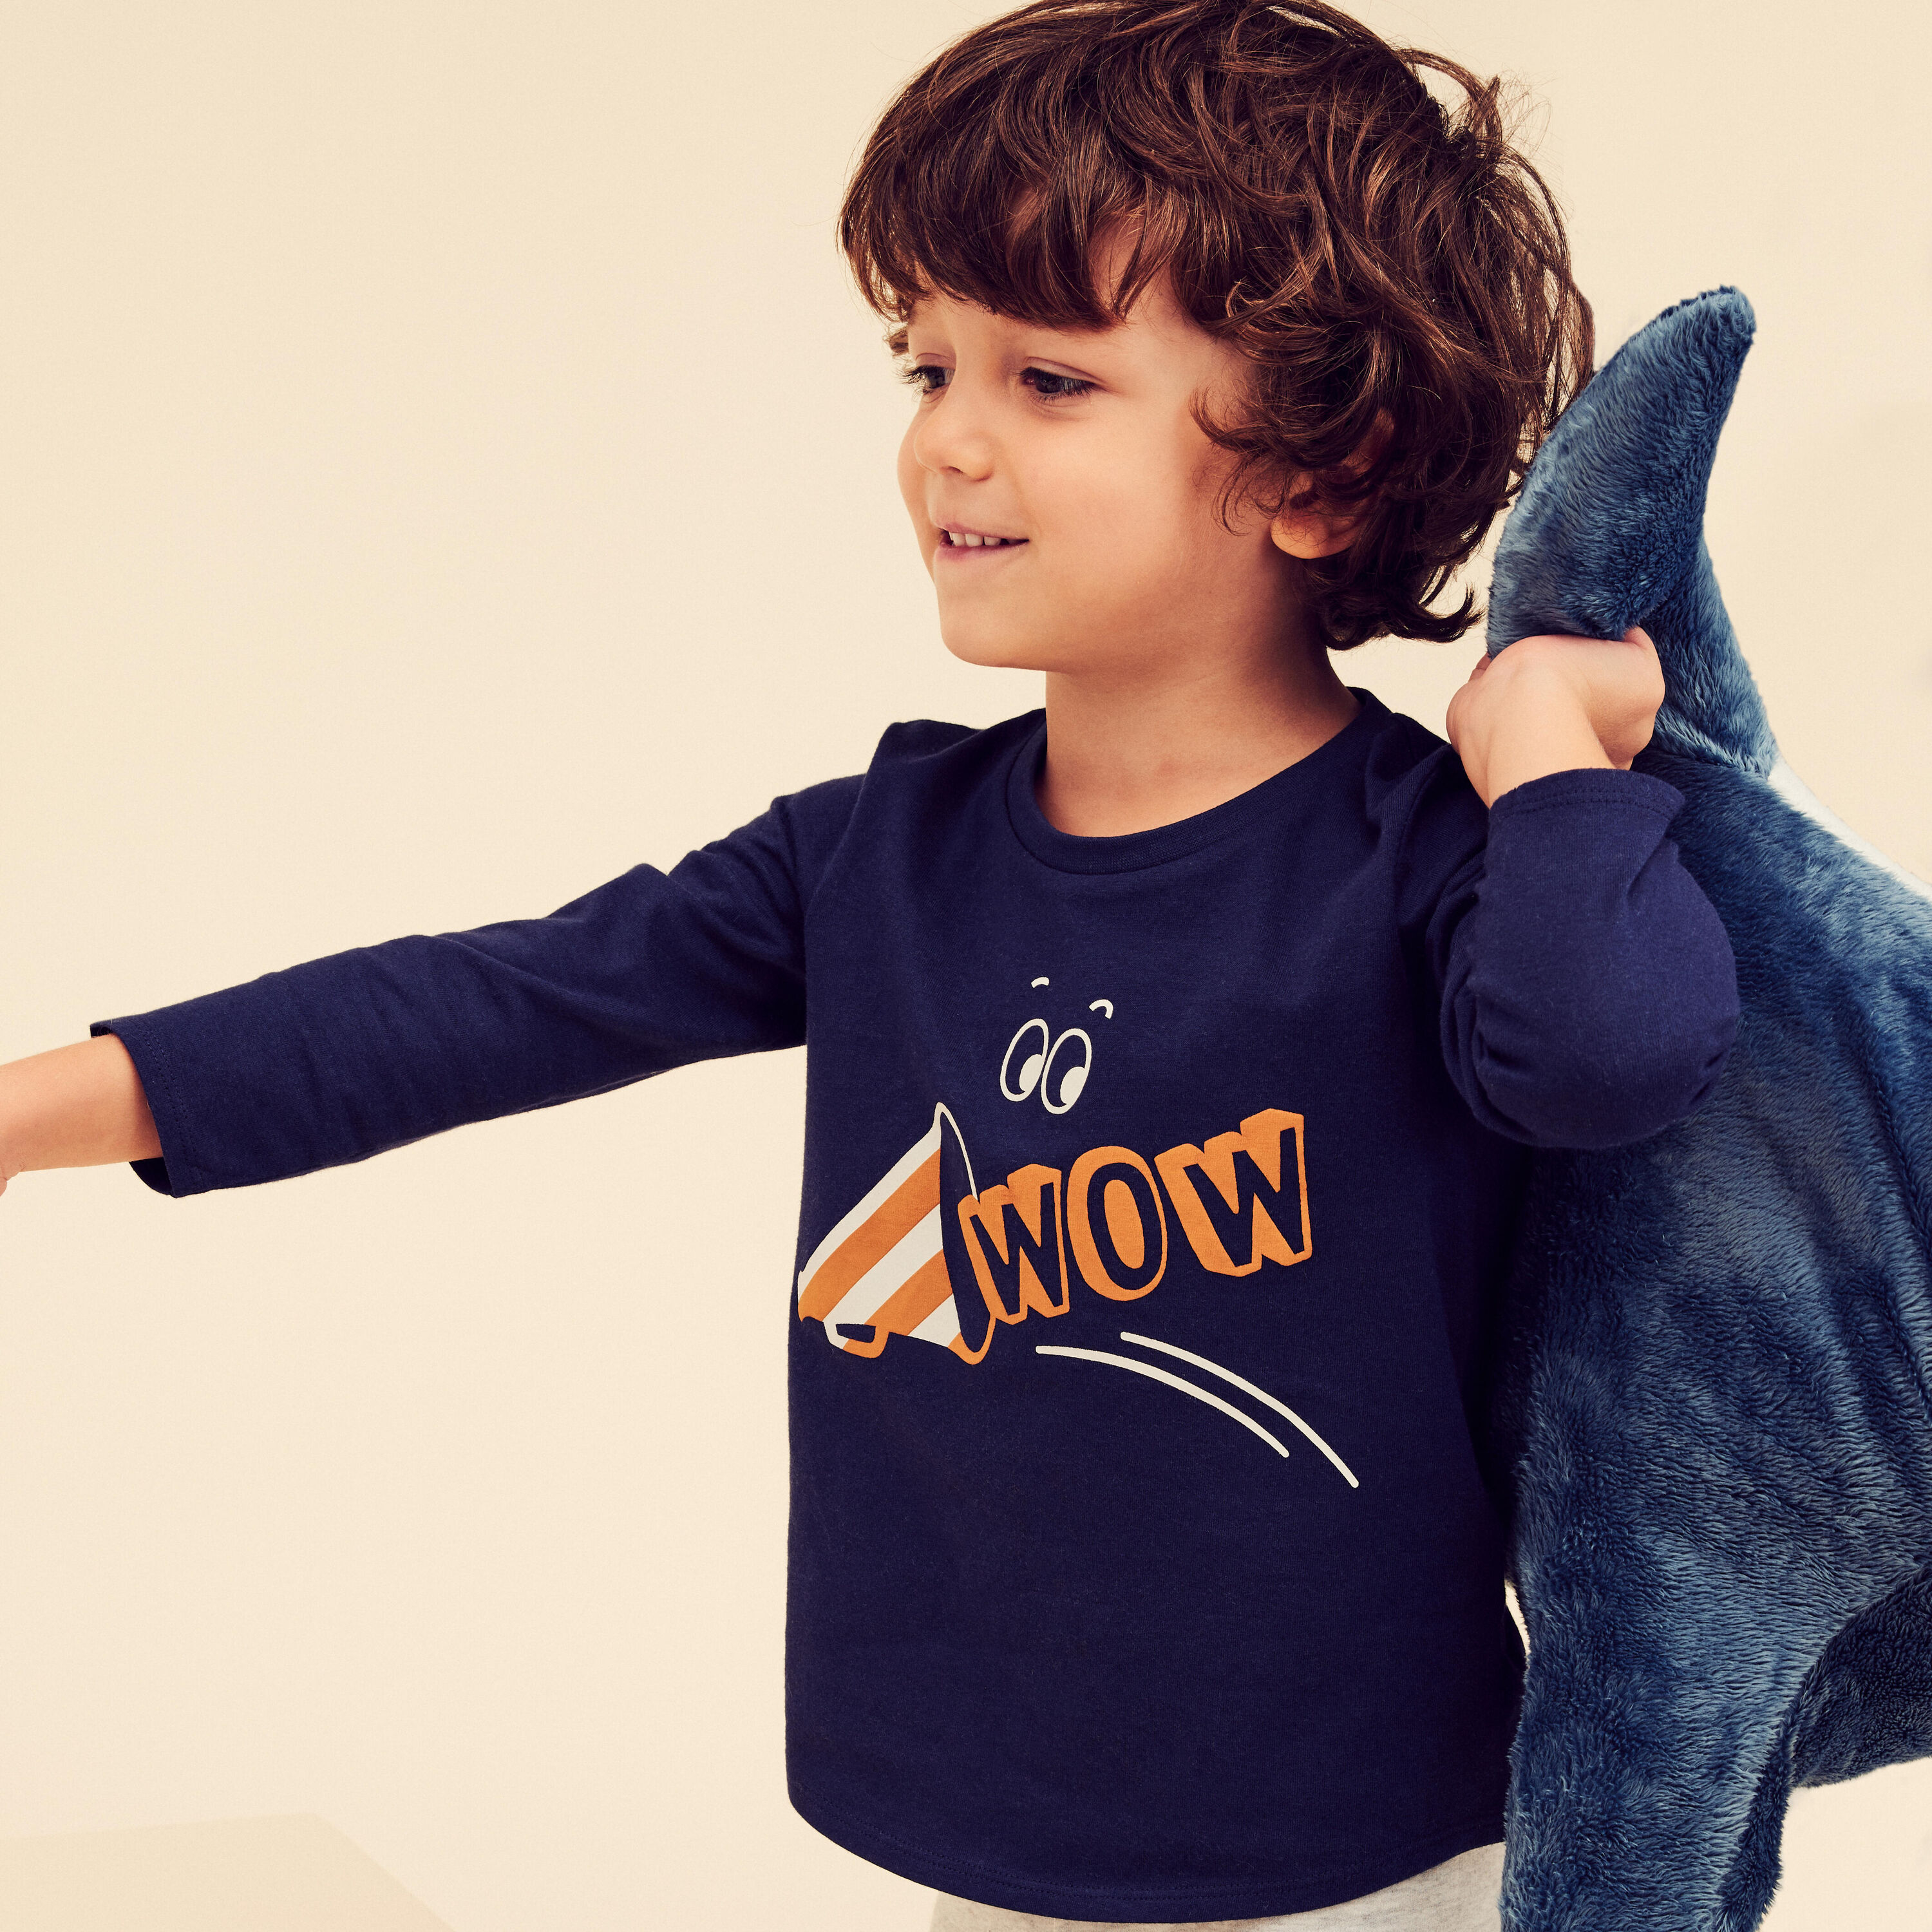 DOMYOS Kids' Long-Sleeved Cotton T-Shirt Basic - Navy Blue with Pattern